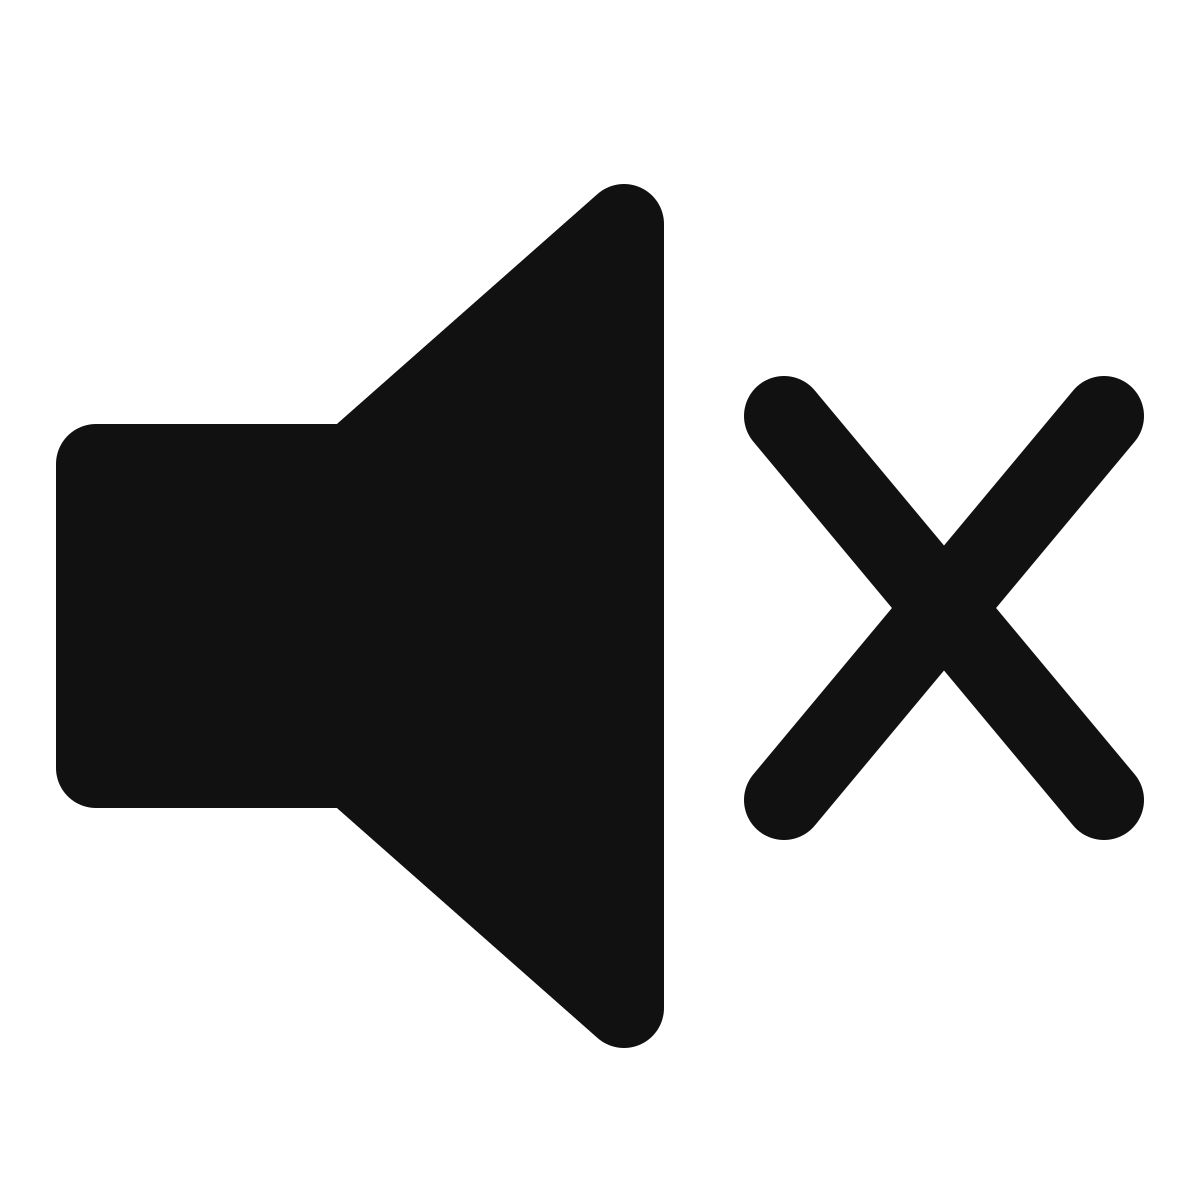 Mute Audio PNG Free Download